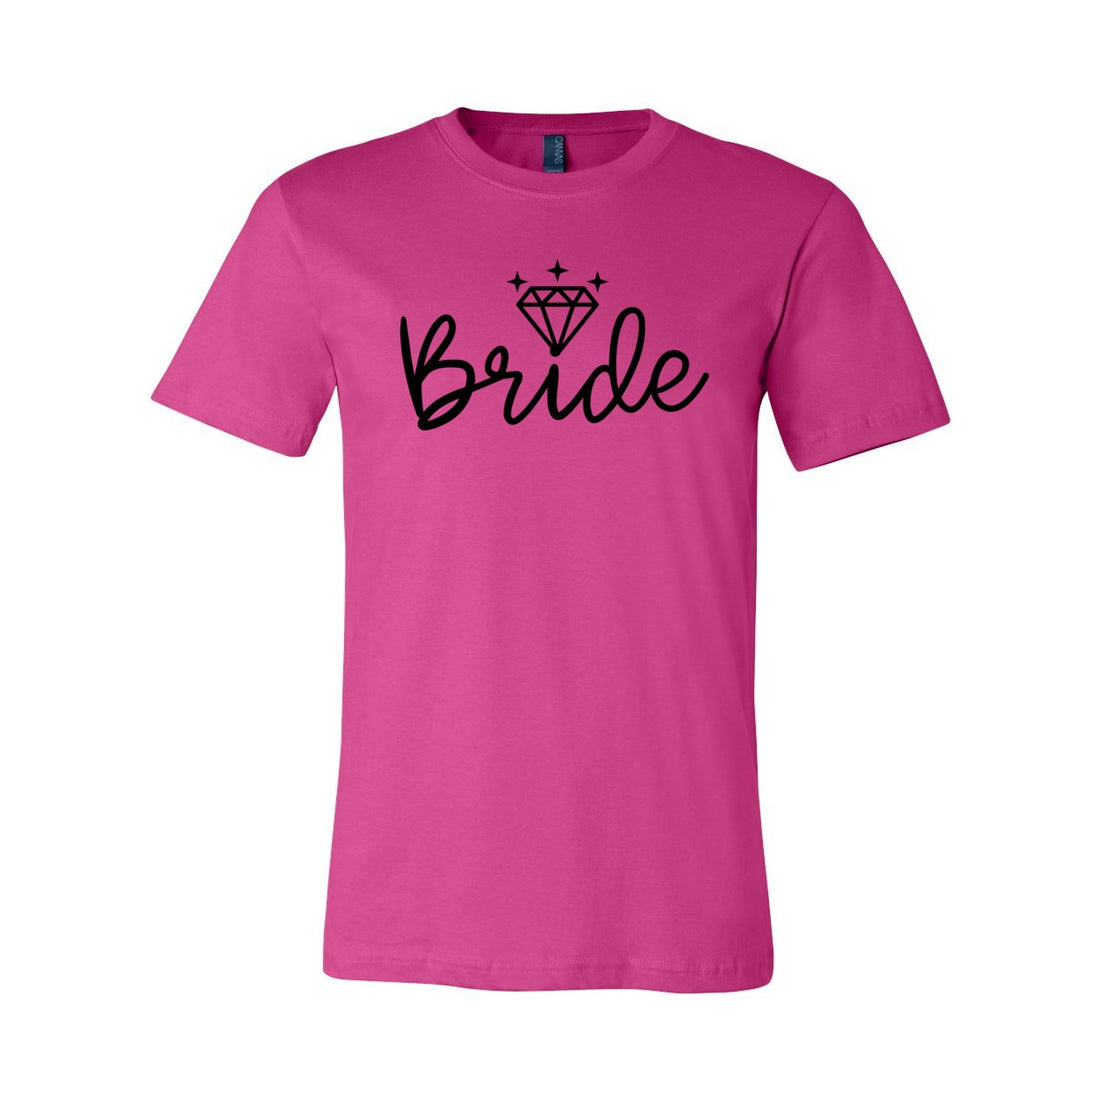 #12 Bride Bling Sleeve Jersey Tee - T-Shirts - Positively Sassy - #12 Bride Bling Sleeve Jersey Tee